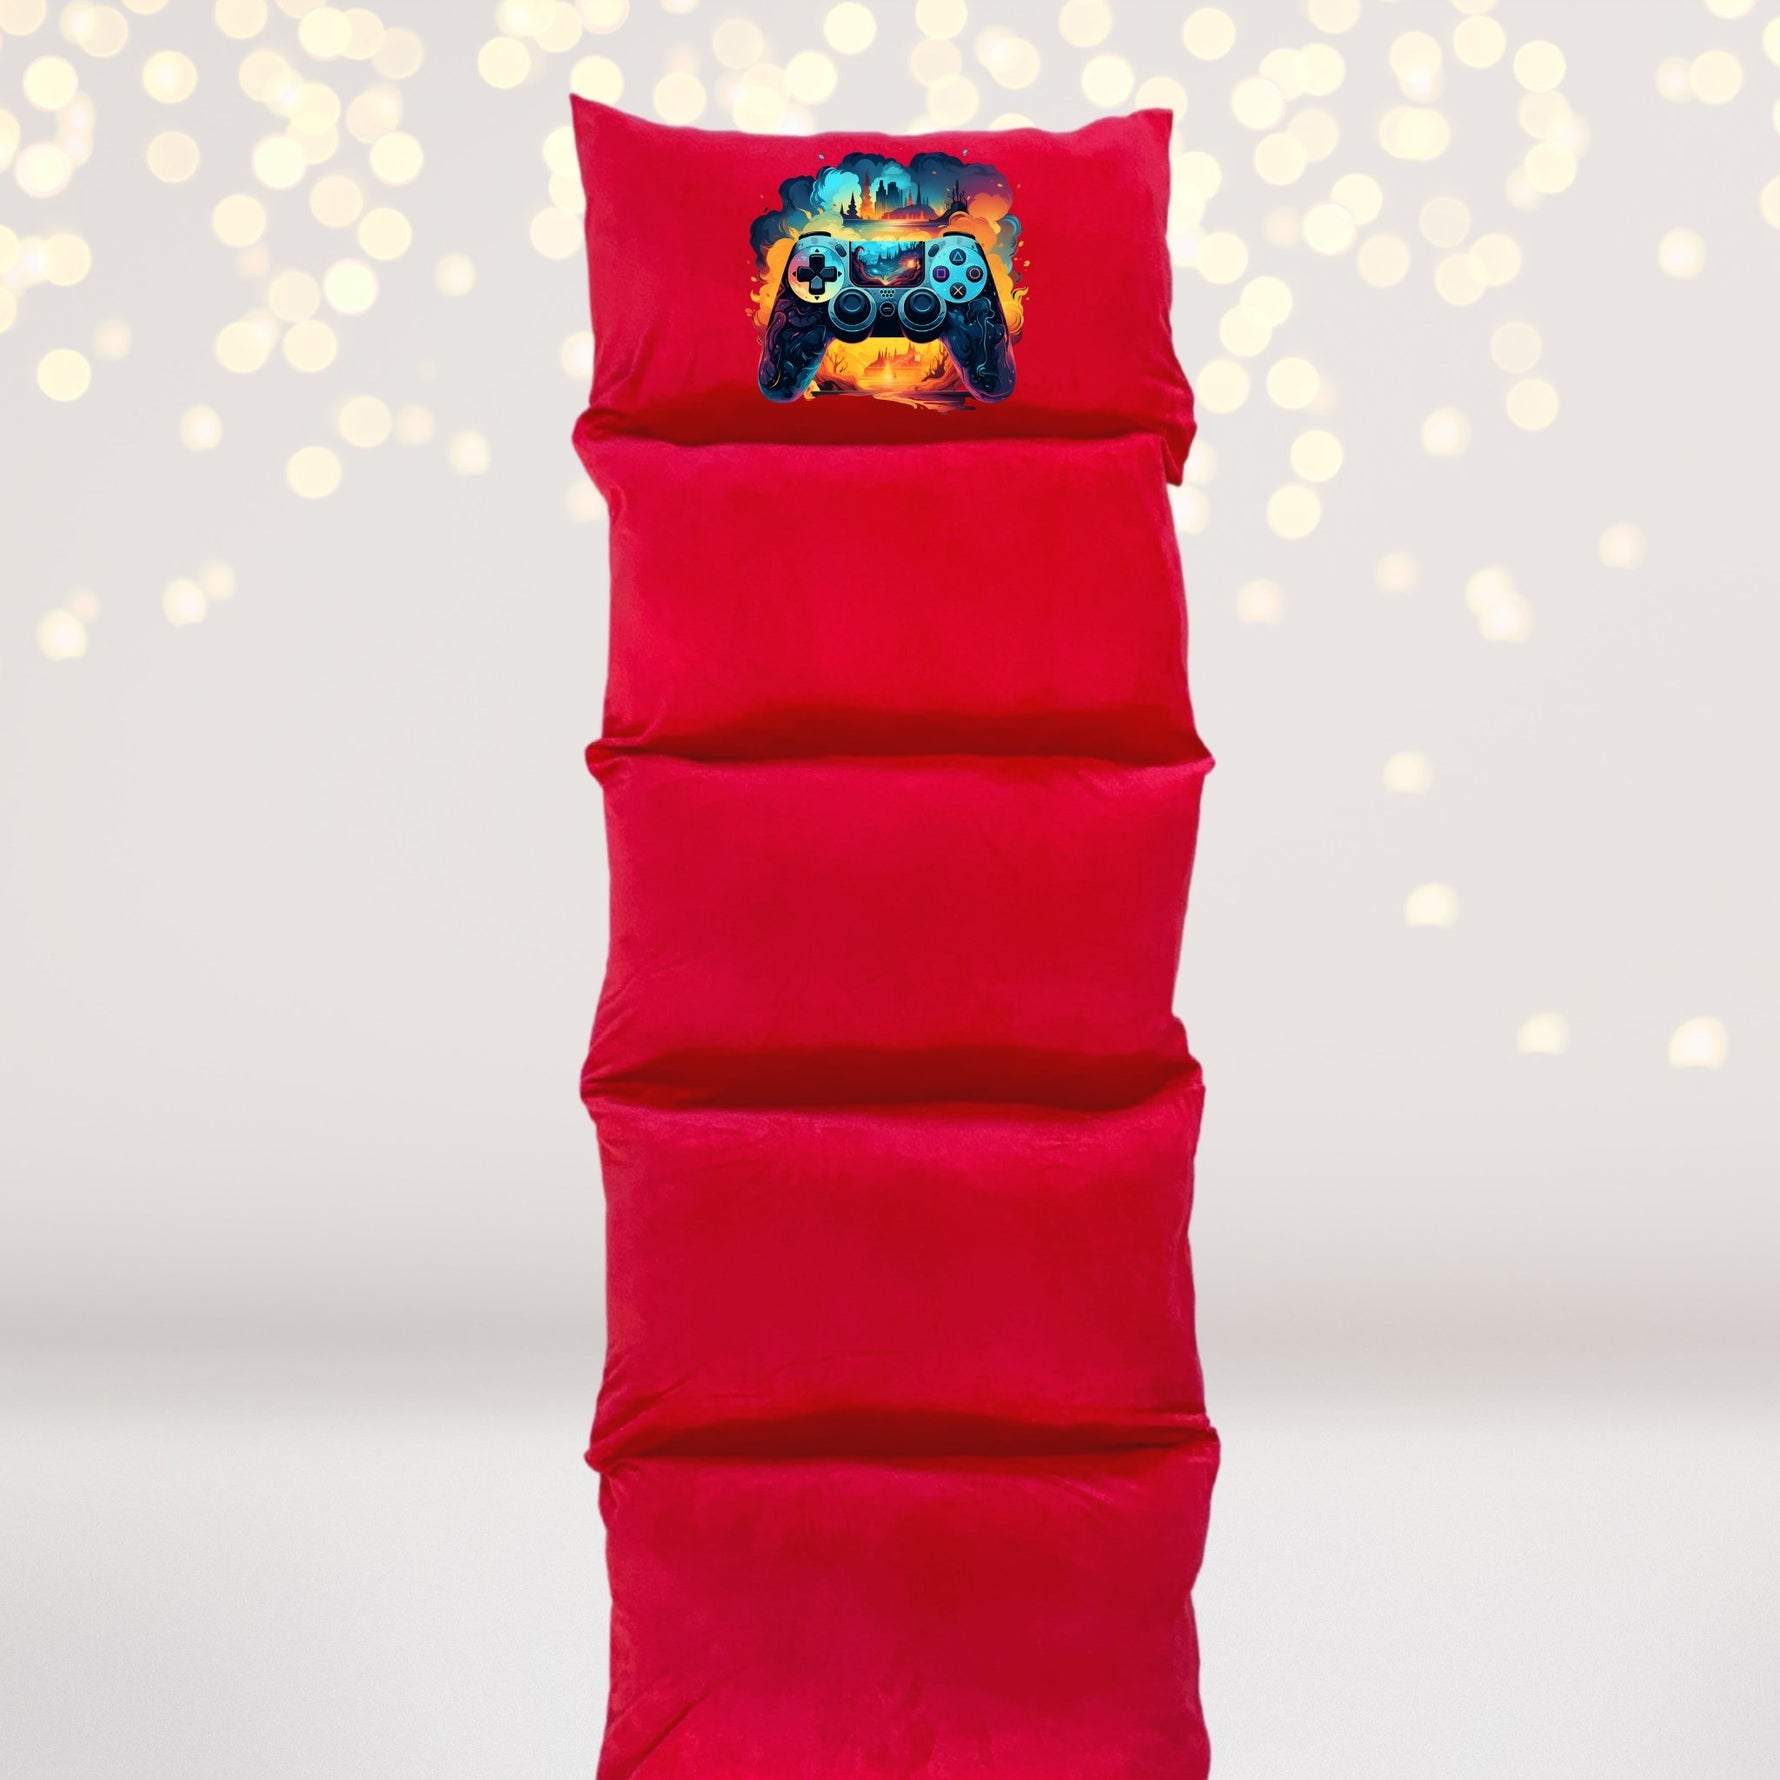 Kids Personalized Red Pillow Bed- Gaming Sleepover 
party